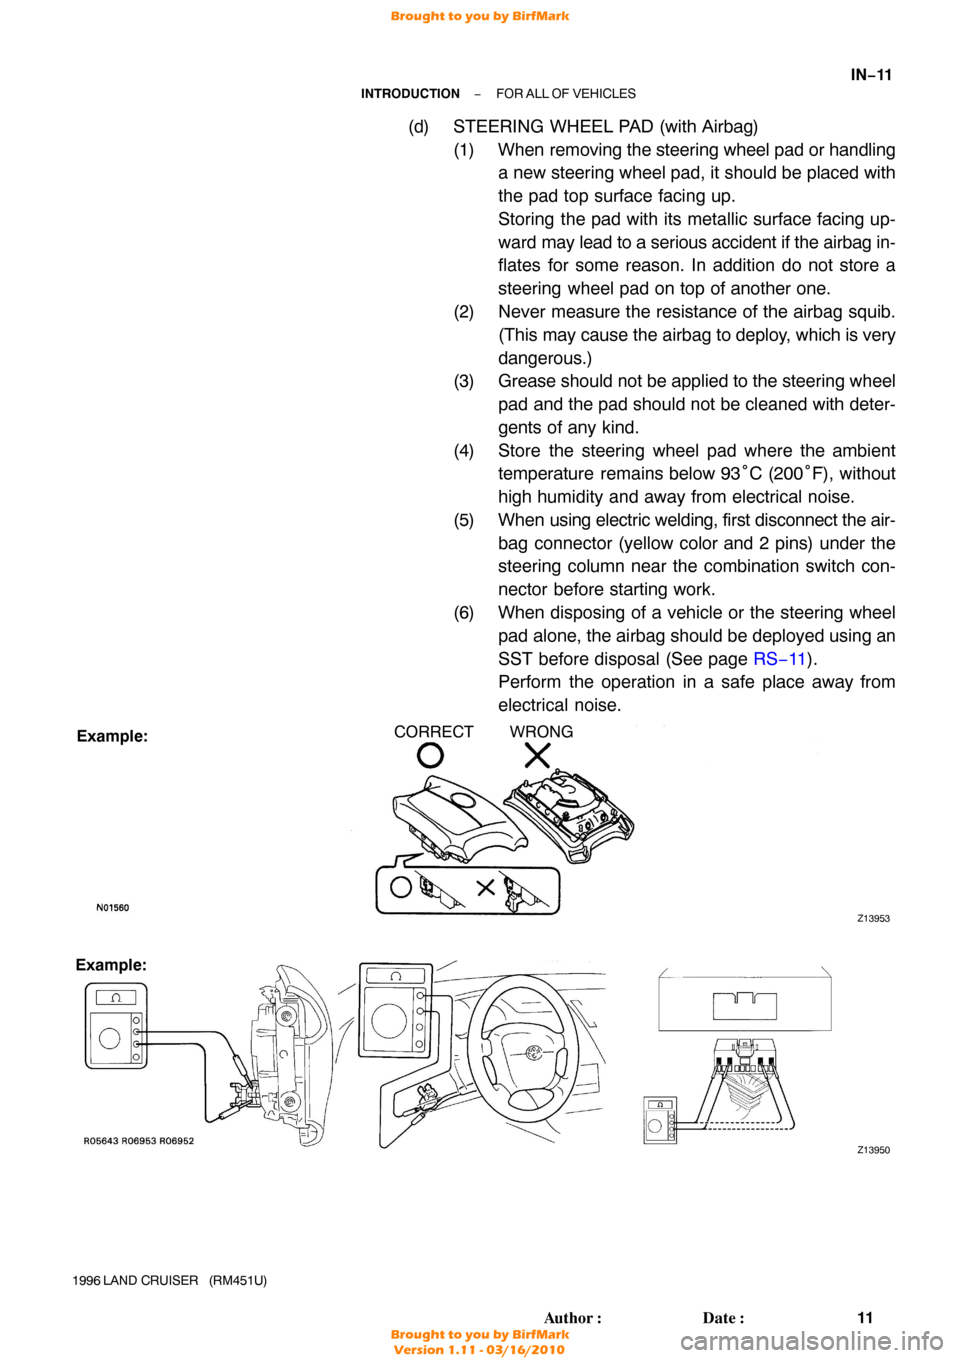 TOYOTA LAND CRUISER 1996 J80 Workshop Manual Z13953
Example:CORRECT WRONG
Z13950
Example:
−
INTRODUCTION FOR ALL OF VEHICLES
IN−11
11
Author: Date:
1996 LAND  CRUISER   (RM451U)
(d) STEERING WHEEL PAD (with Airbag)
(1) When removing the st